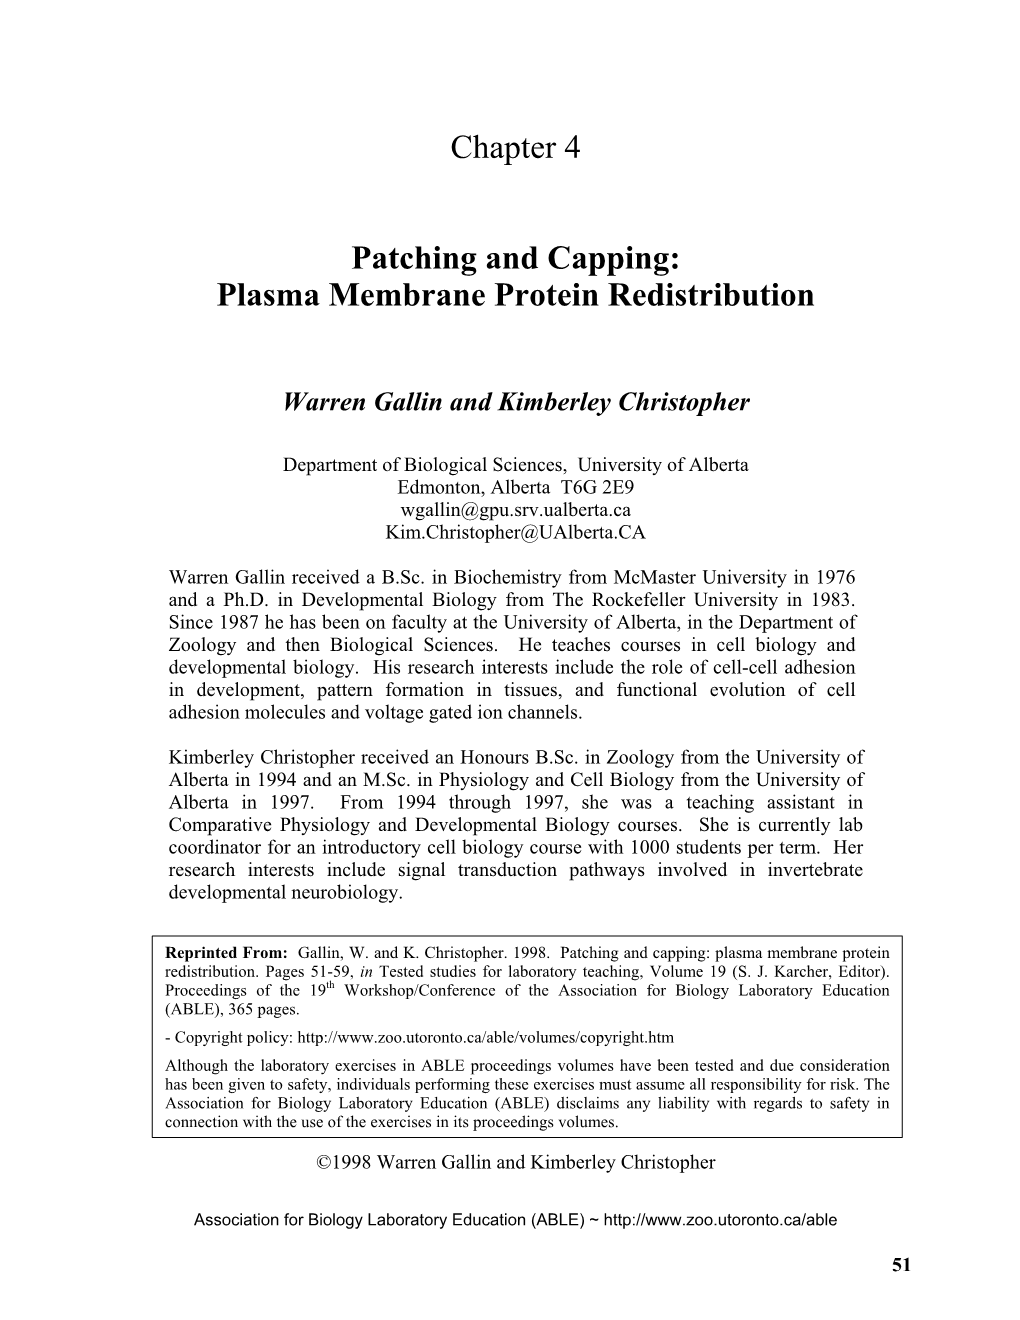 Chapter 4 Patching and Capping: Plasma Membrane Protein